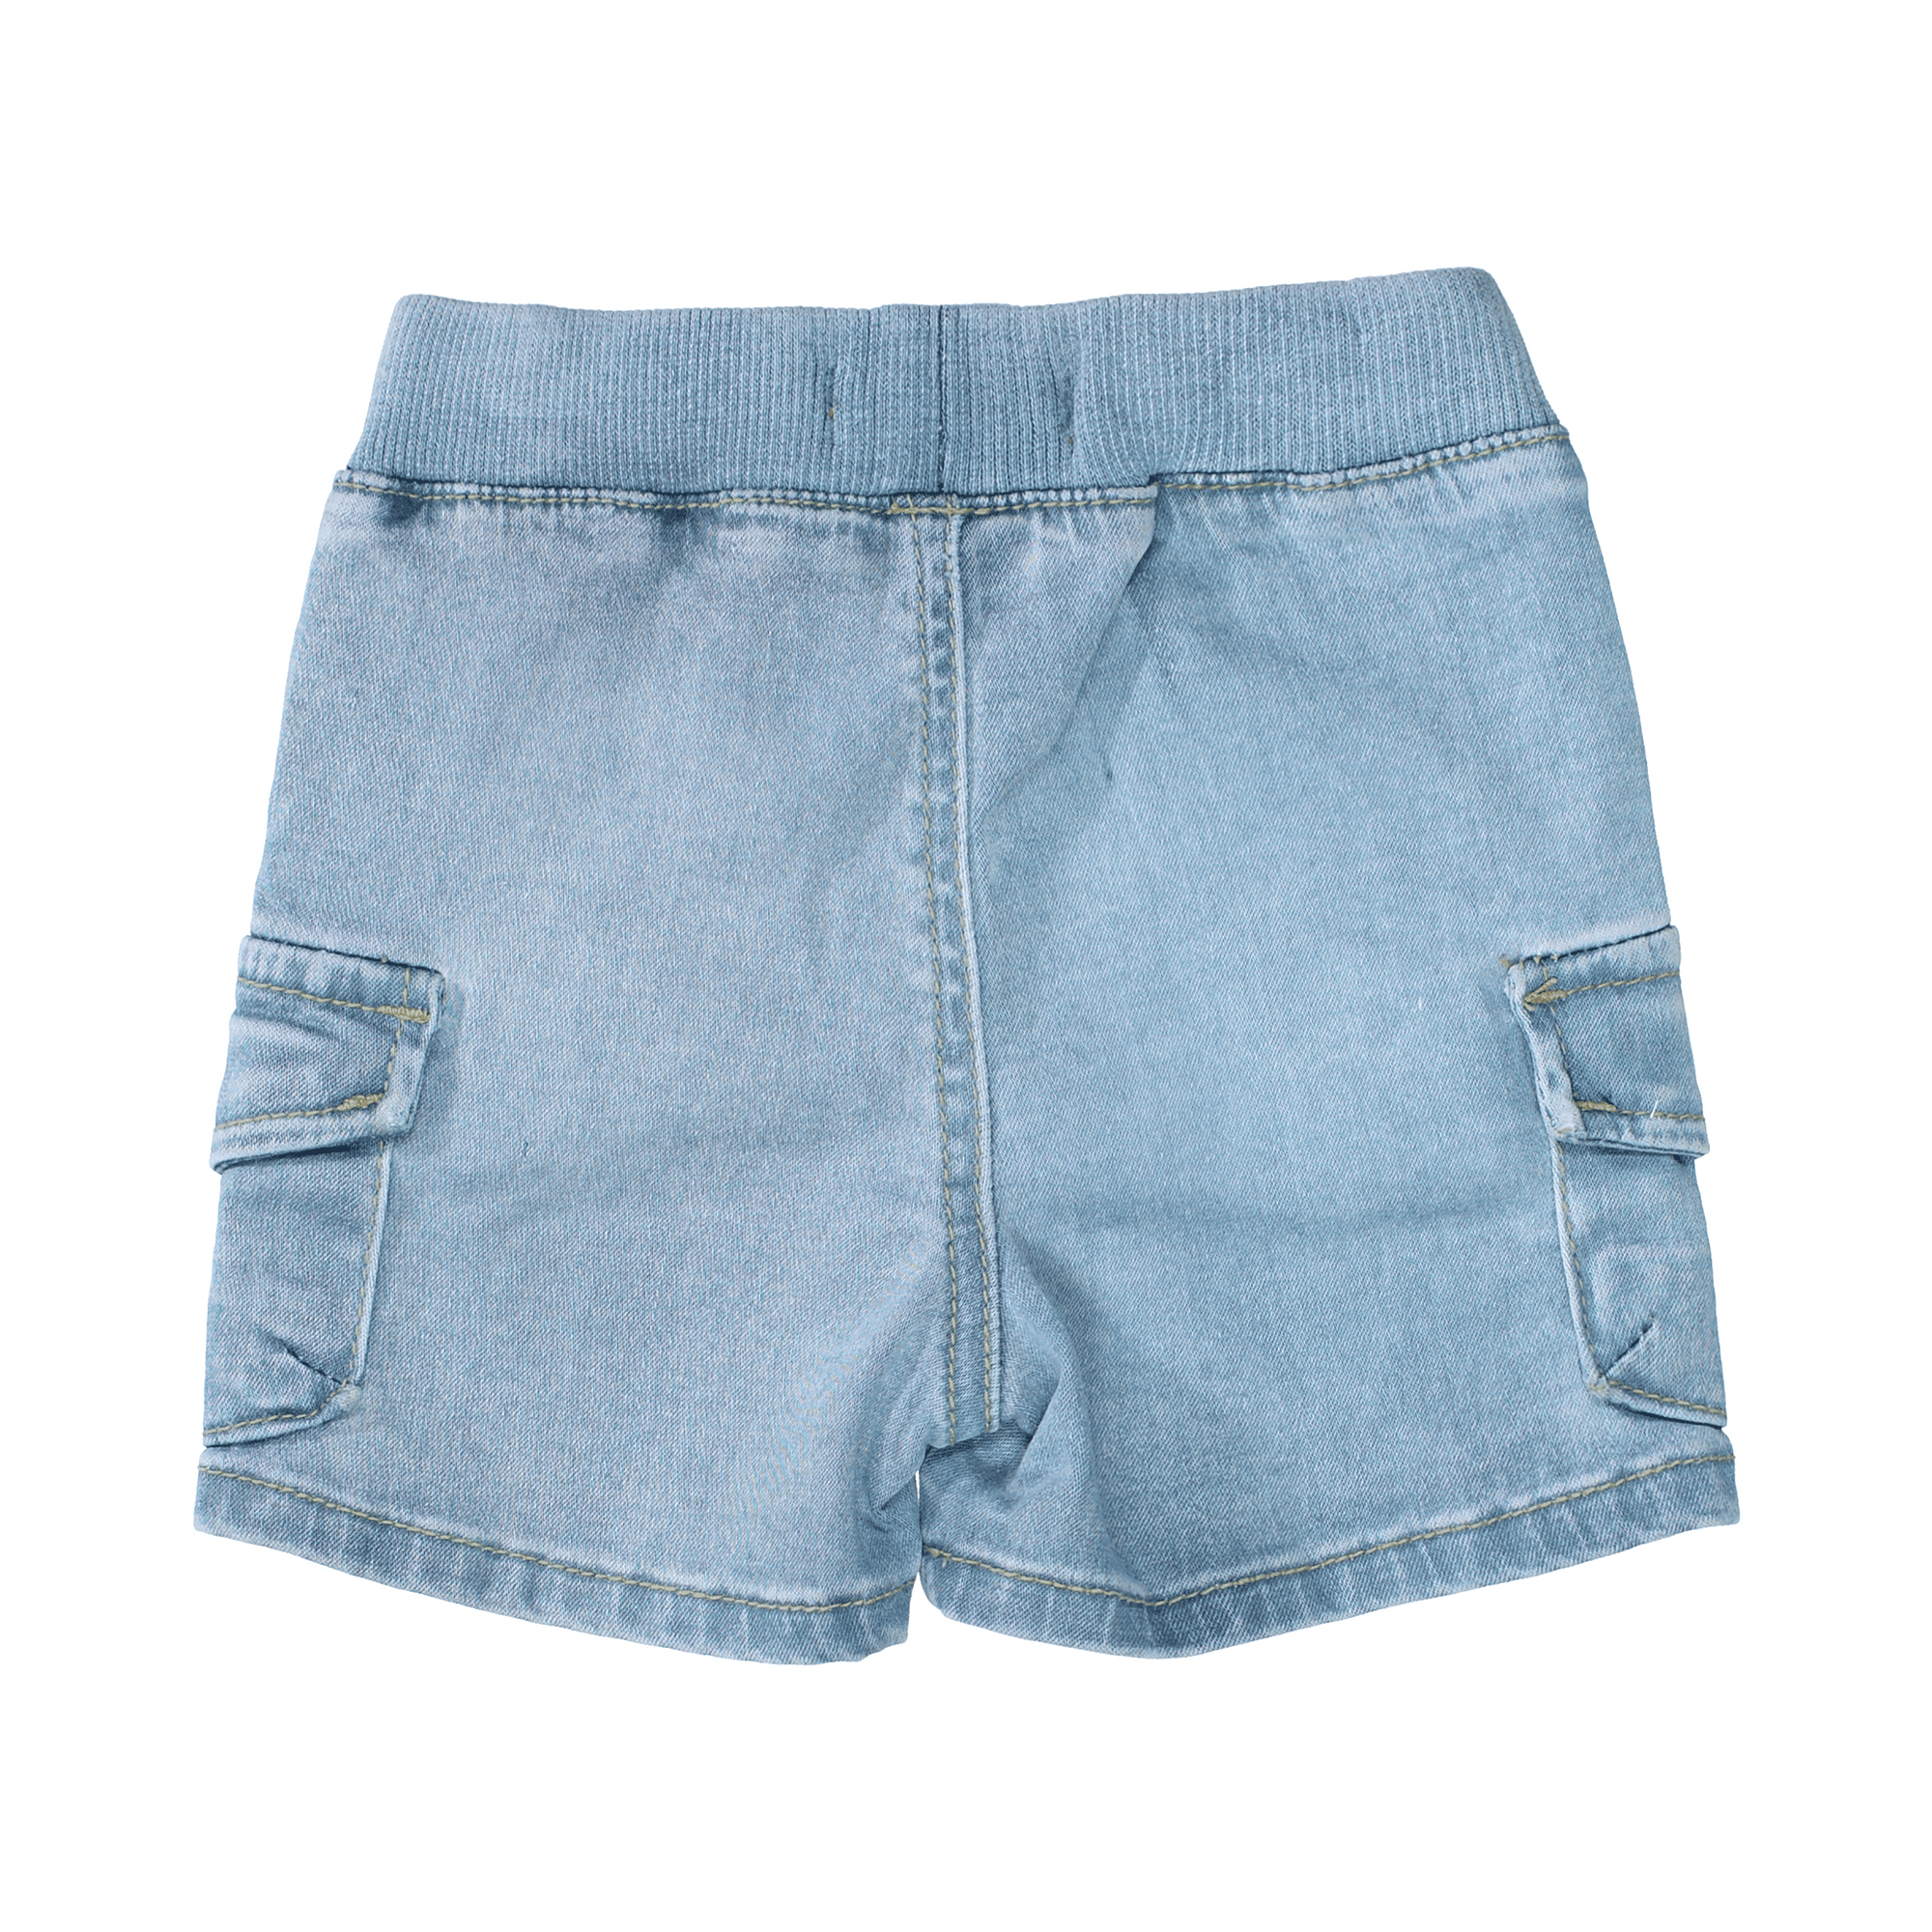 Jeans-Shorts STACCATO Blau M2000585466909 2